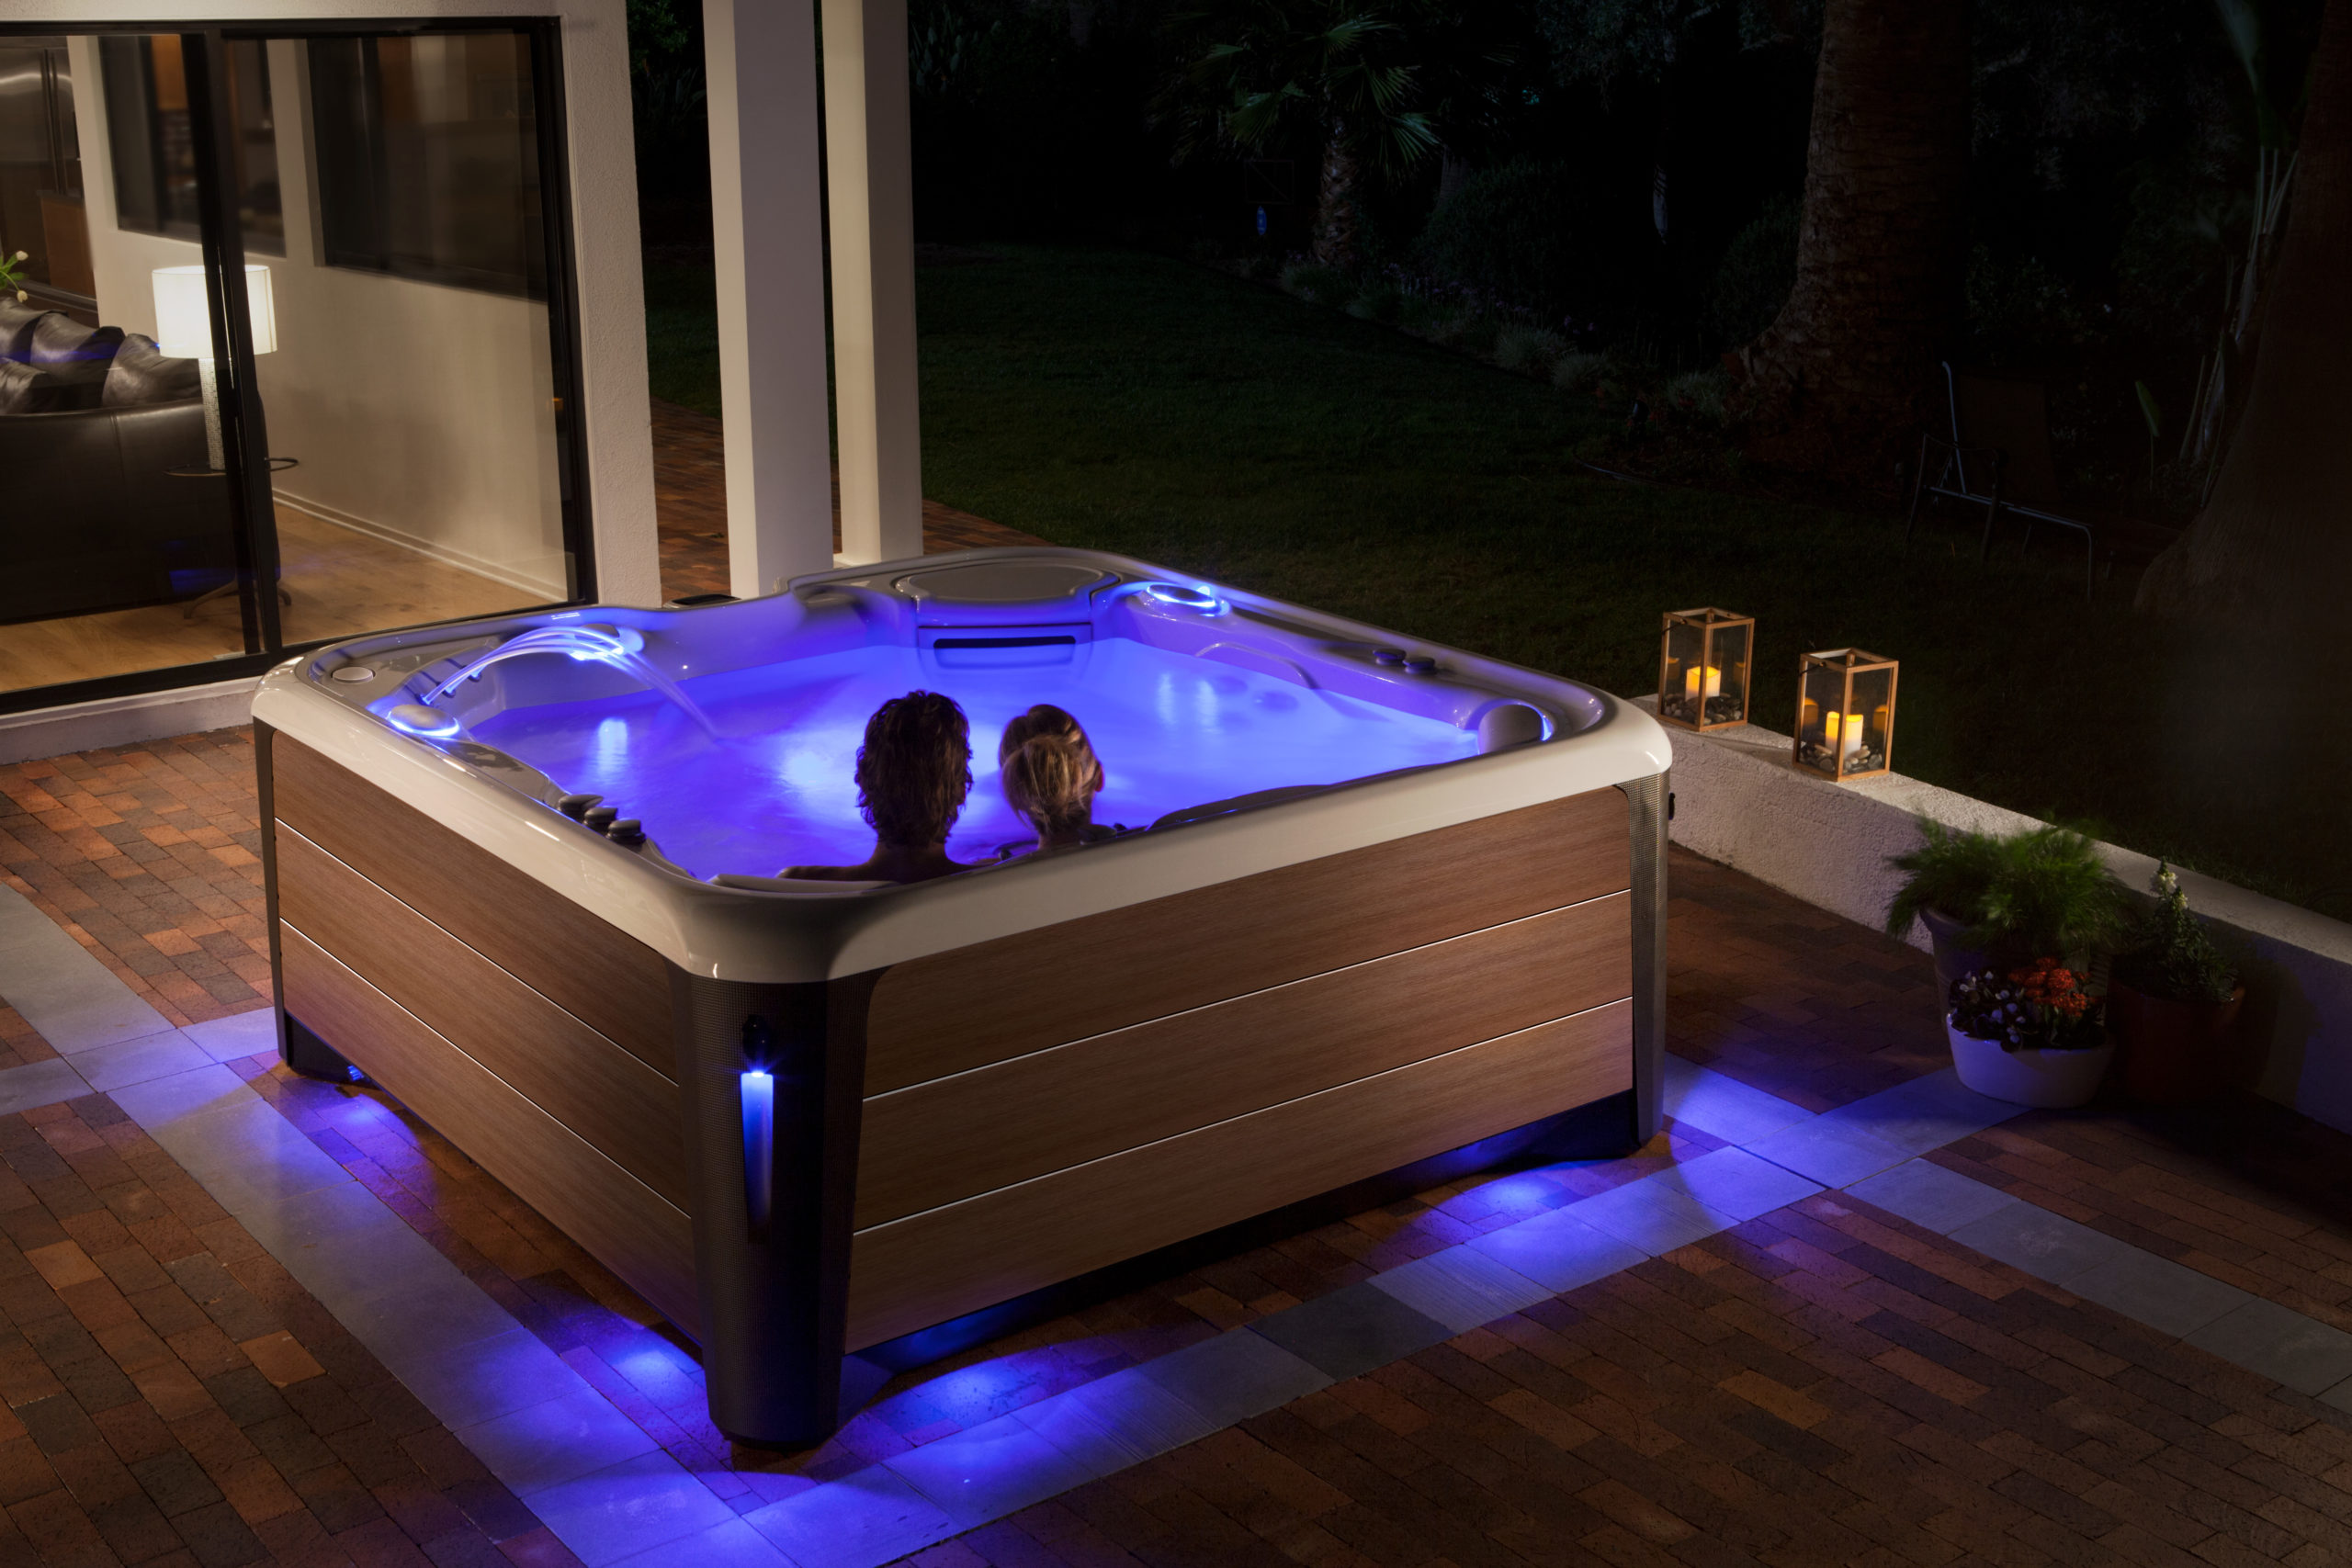 A Valentine’s Day hot tub is a warm romantic getaway without leaving your house.